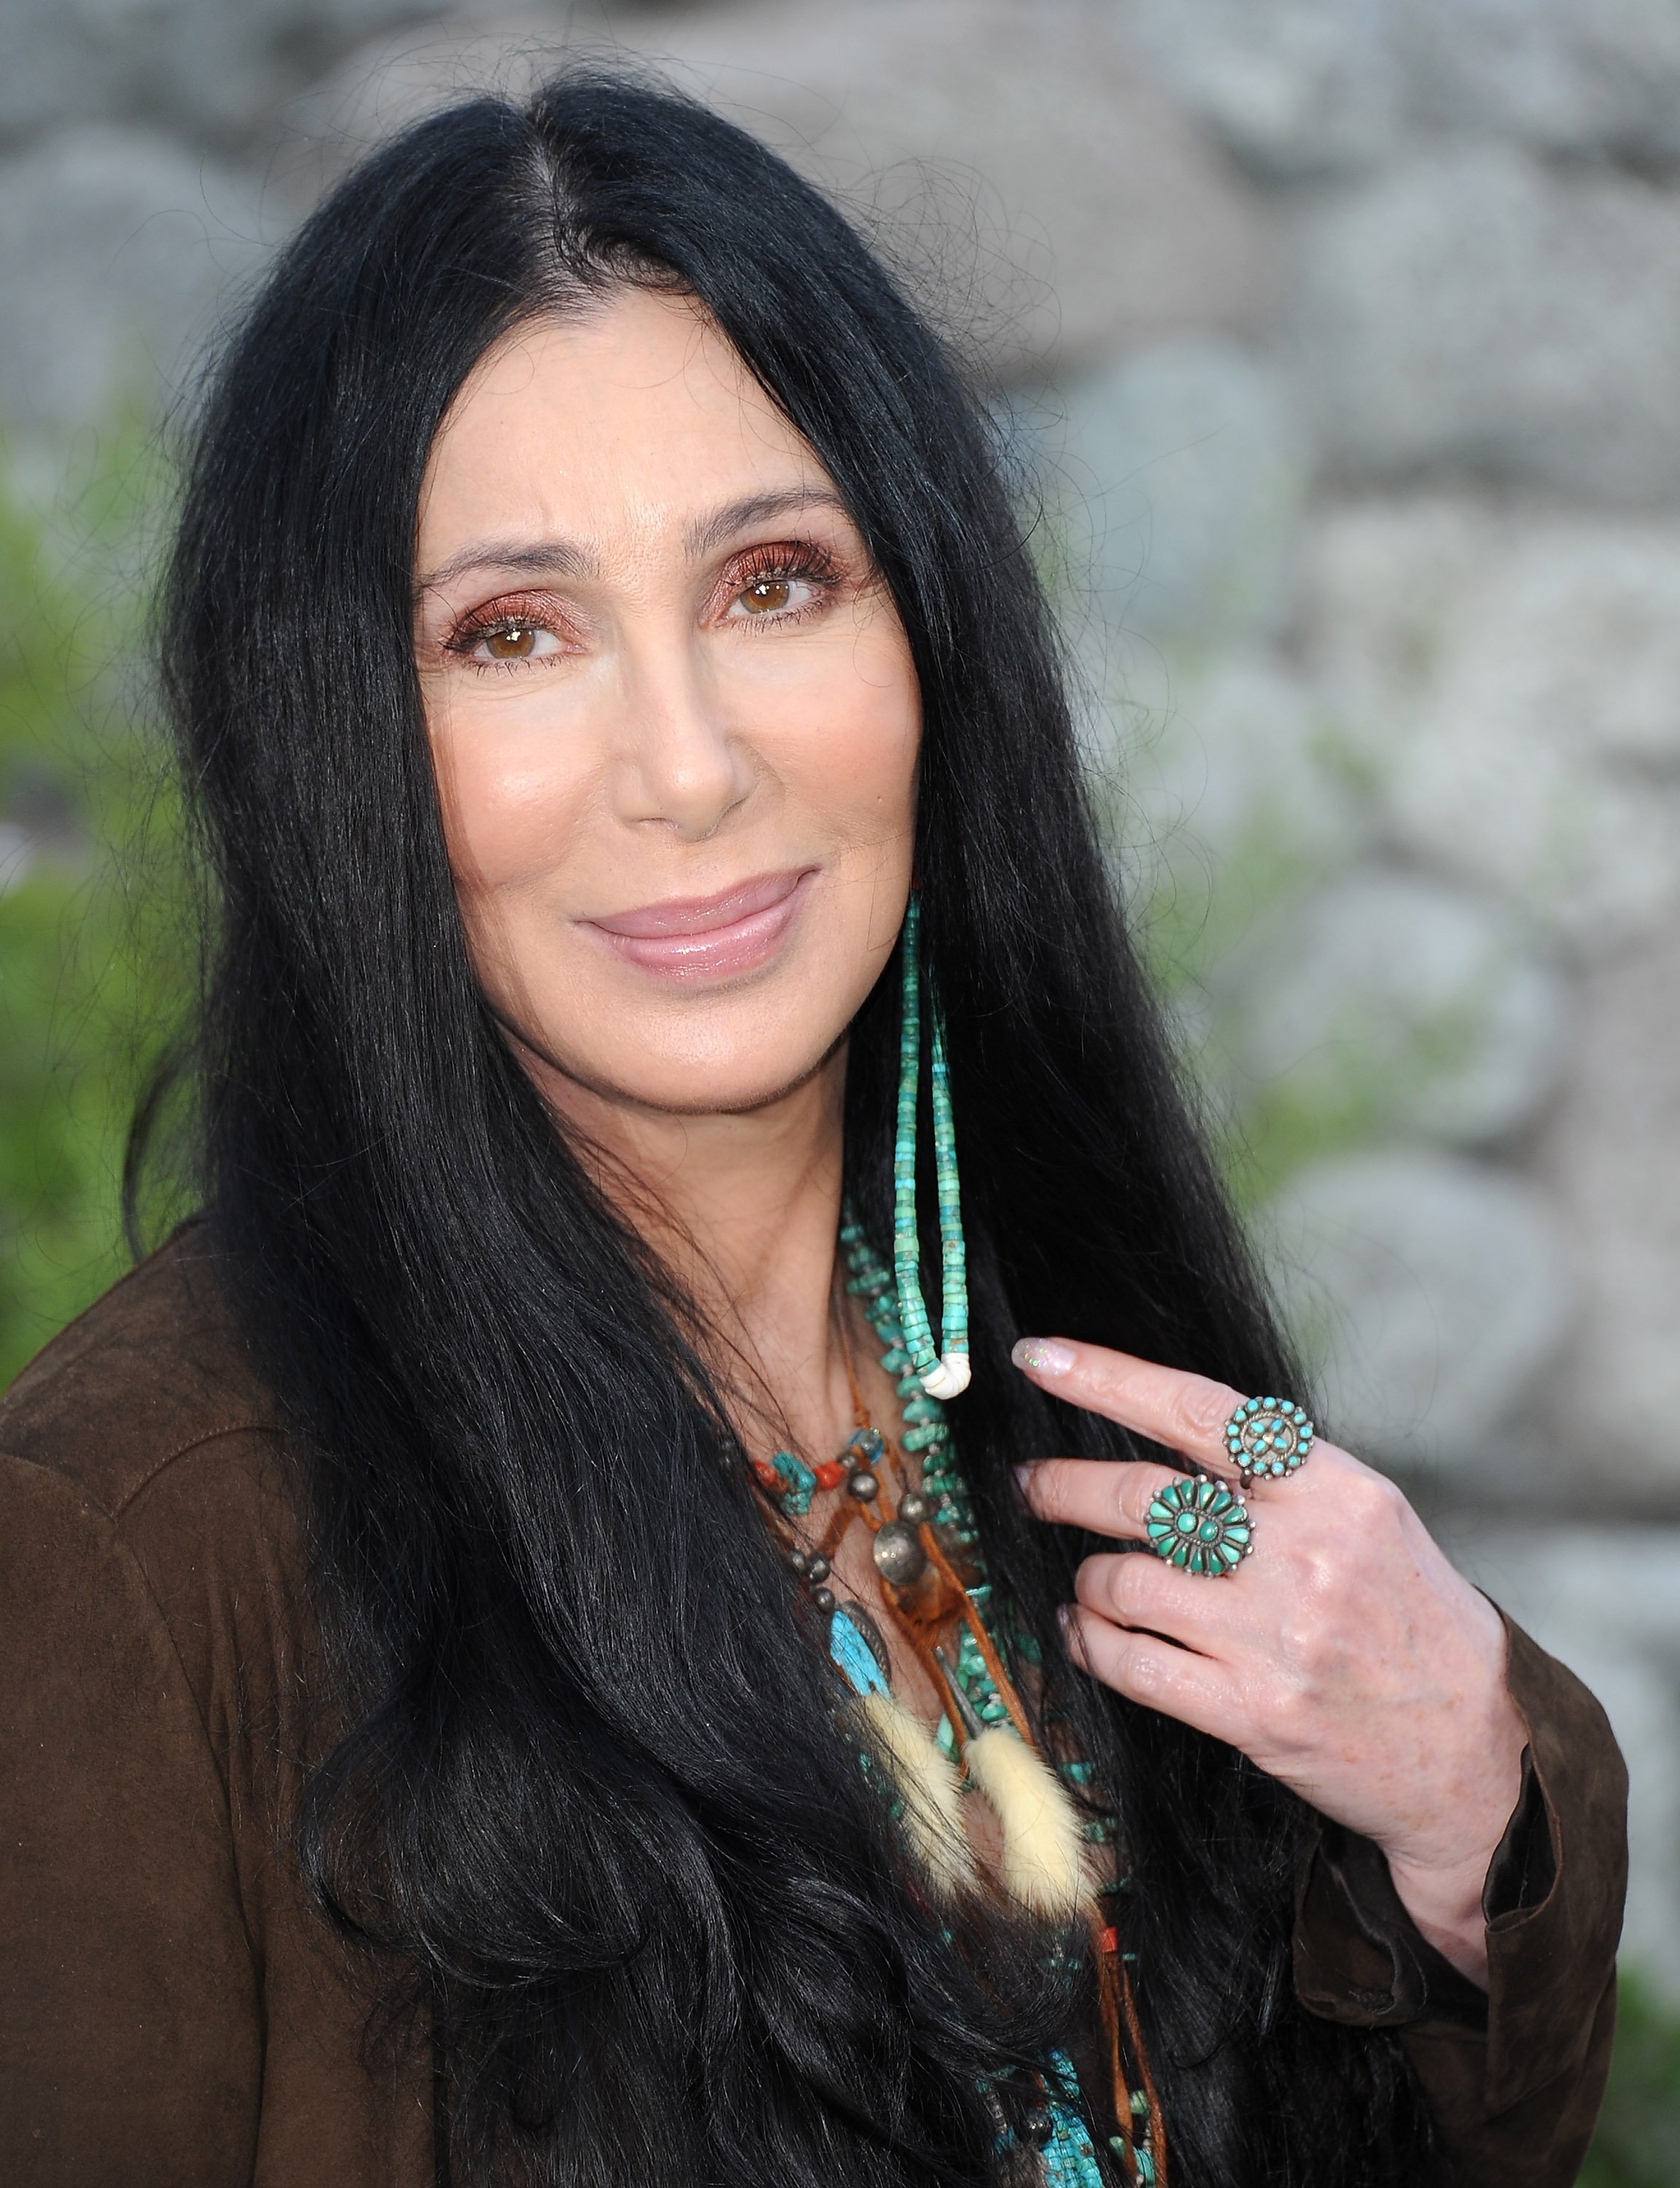 Cher arrives at the premiere of "The Zookeeper" at the Regency Village Theatre on July 6, 2011, in Los Angeles, California. | Source: Getty Images